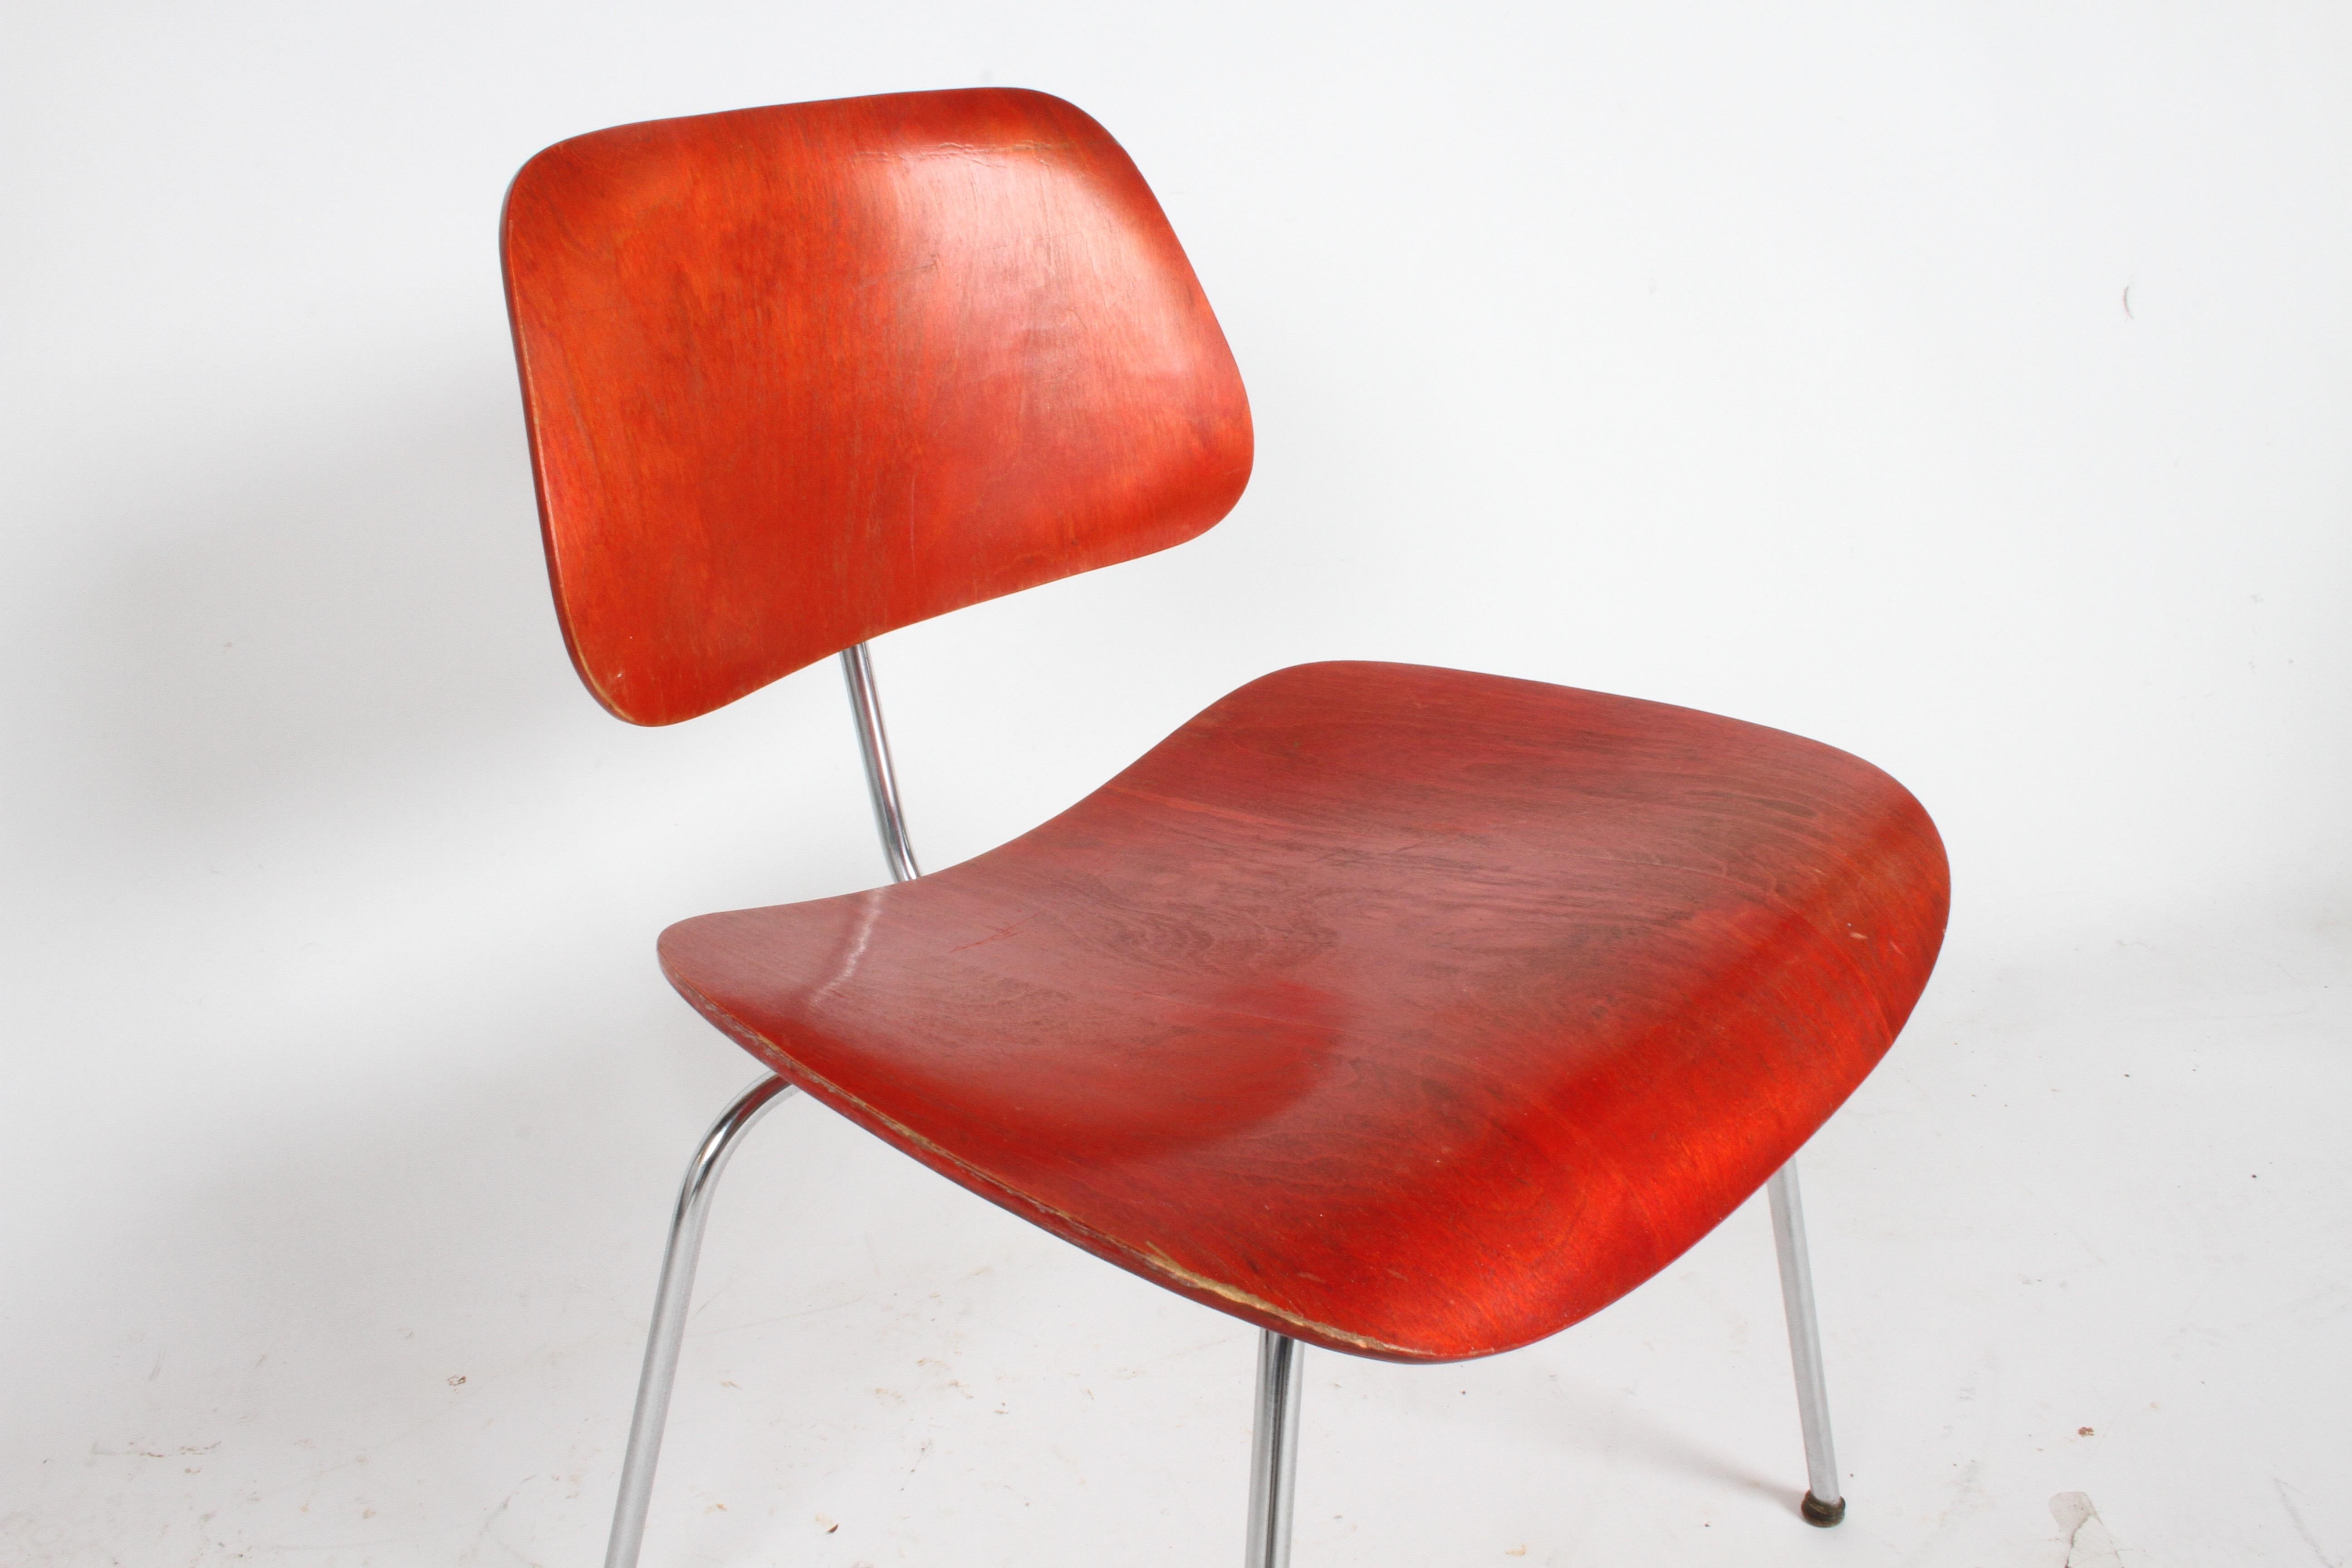 Early Charles Eames for Herman Miller red Aniline stained DCM with early glides, no label. Shock mounts are still solid, there is wear and loss to finish, see photos.